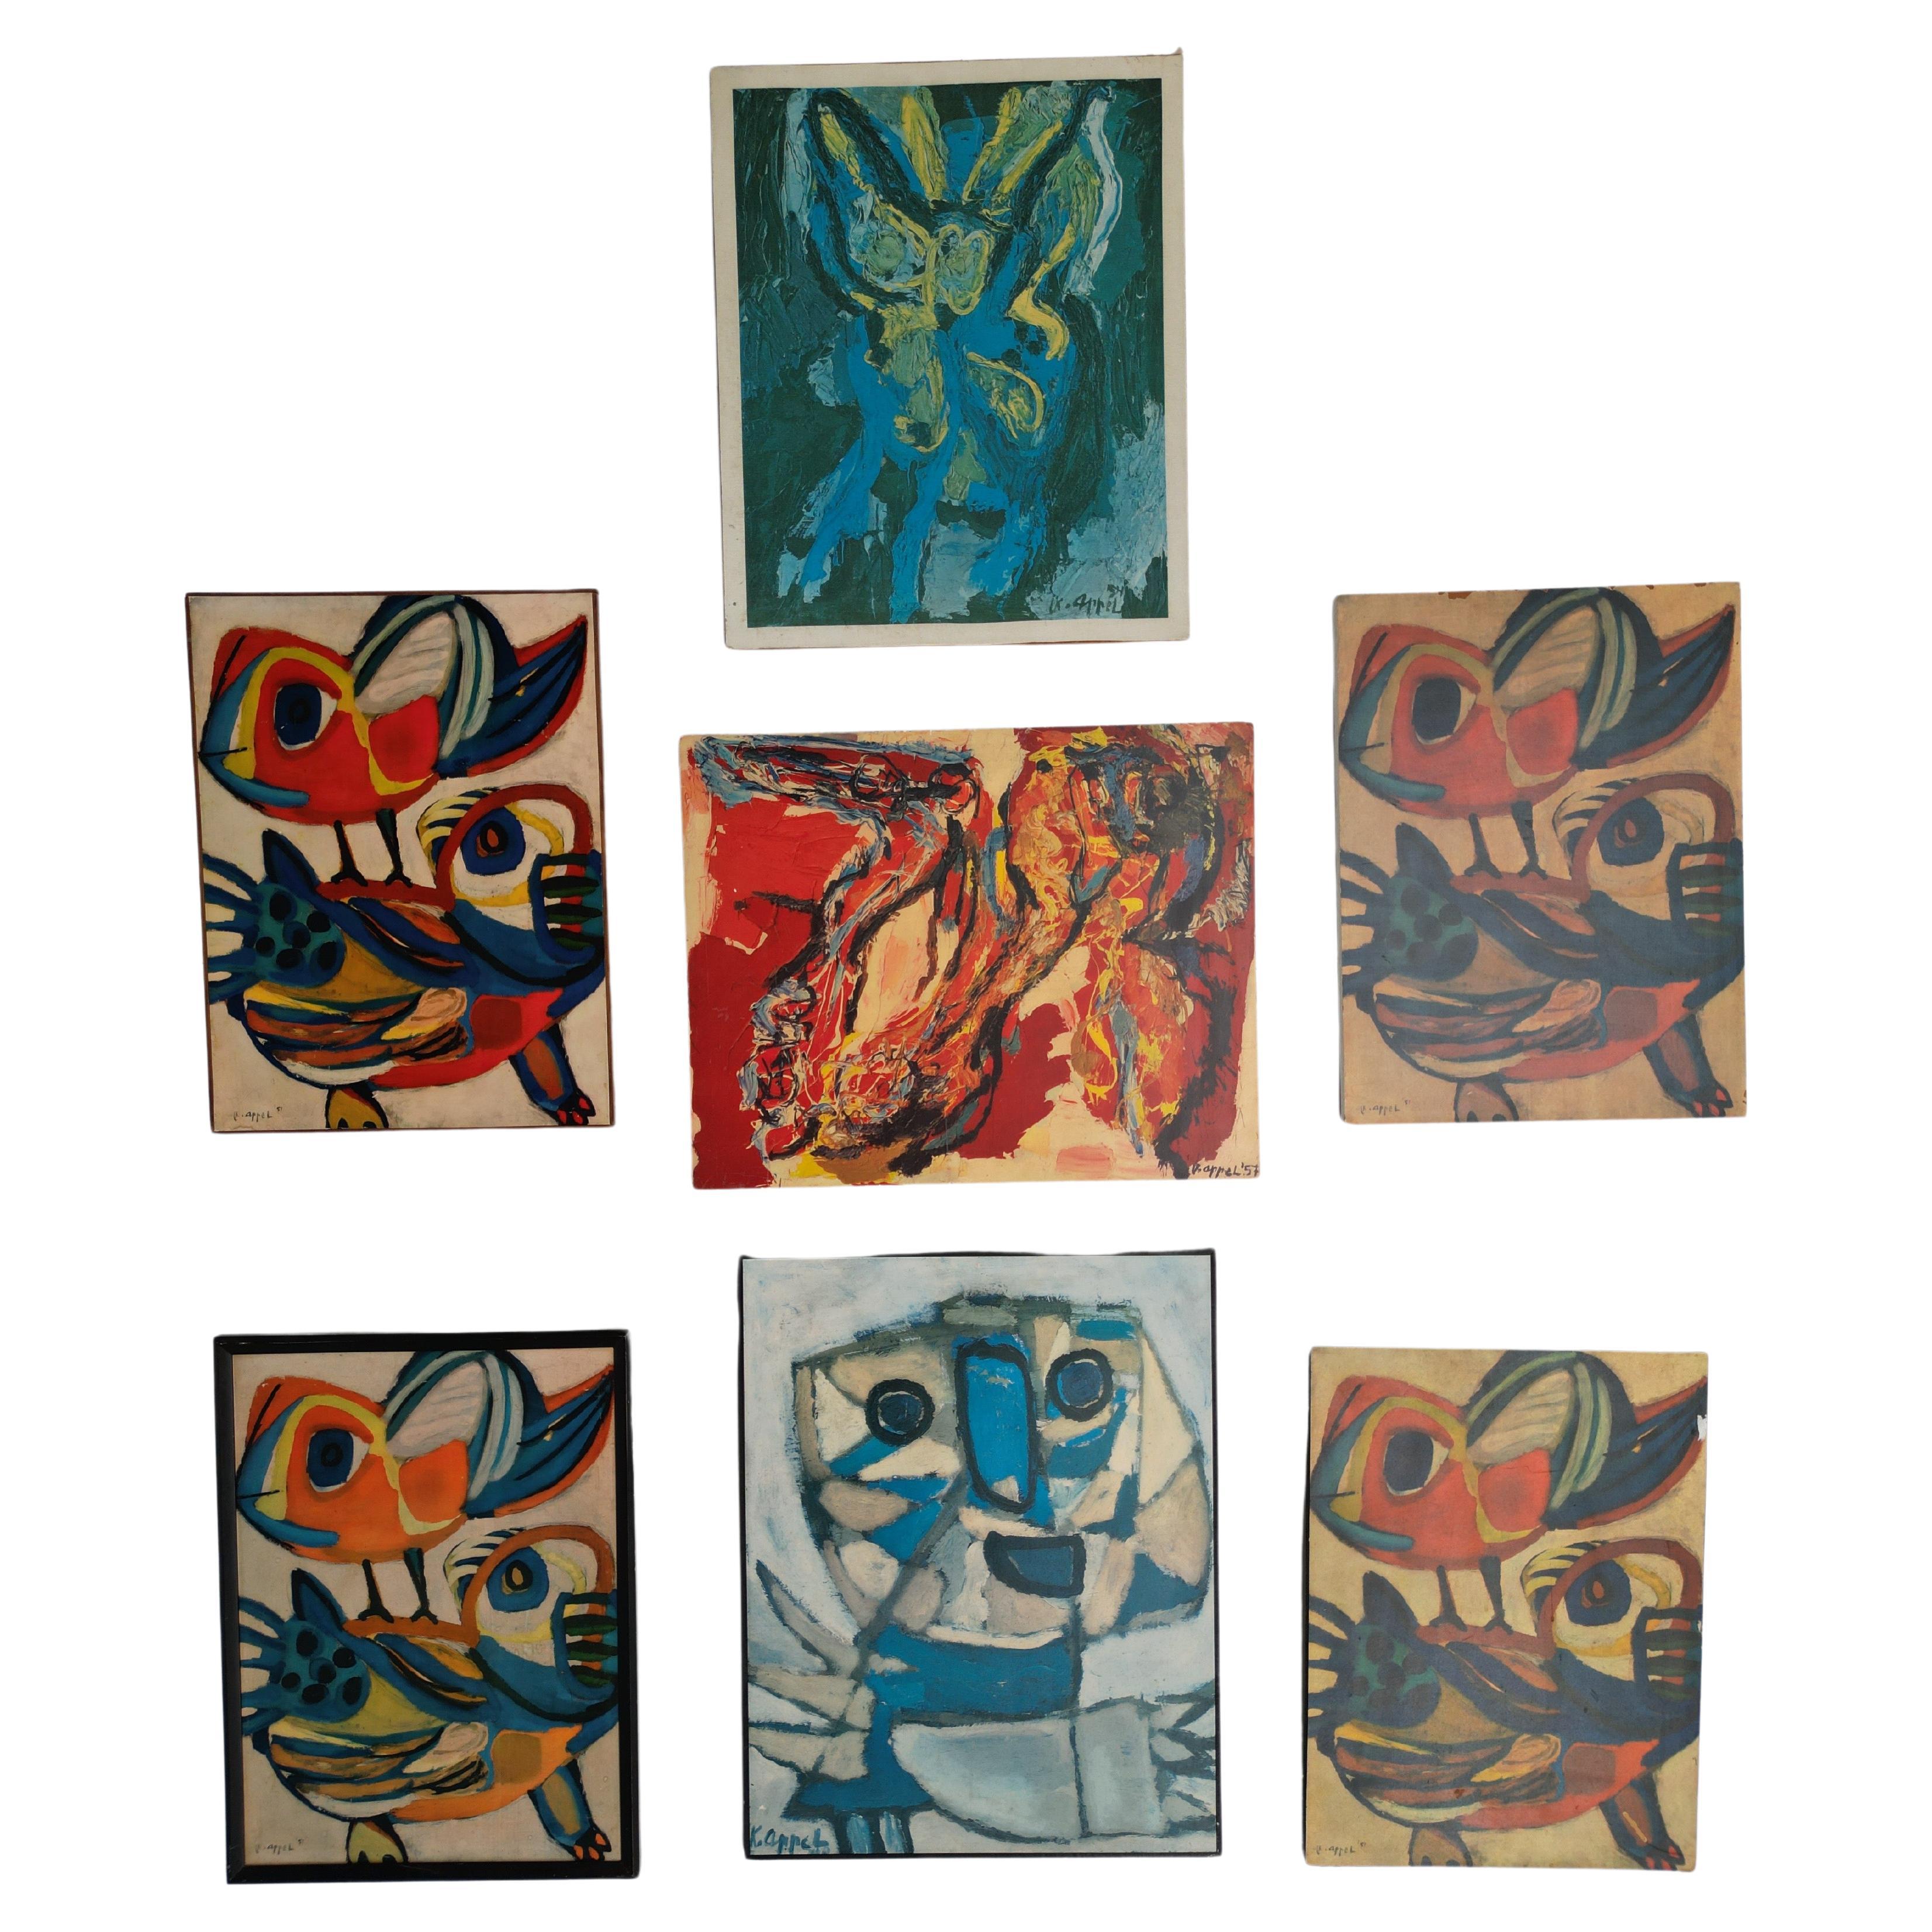 Collection of 7 Karel Appel 1970's Period Reproduction Posters on Chipwood